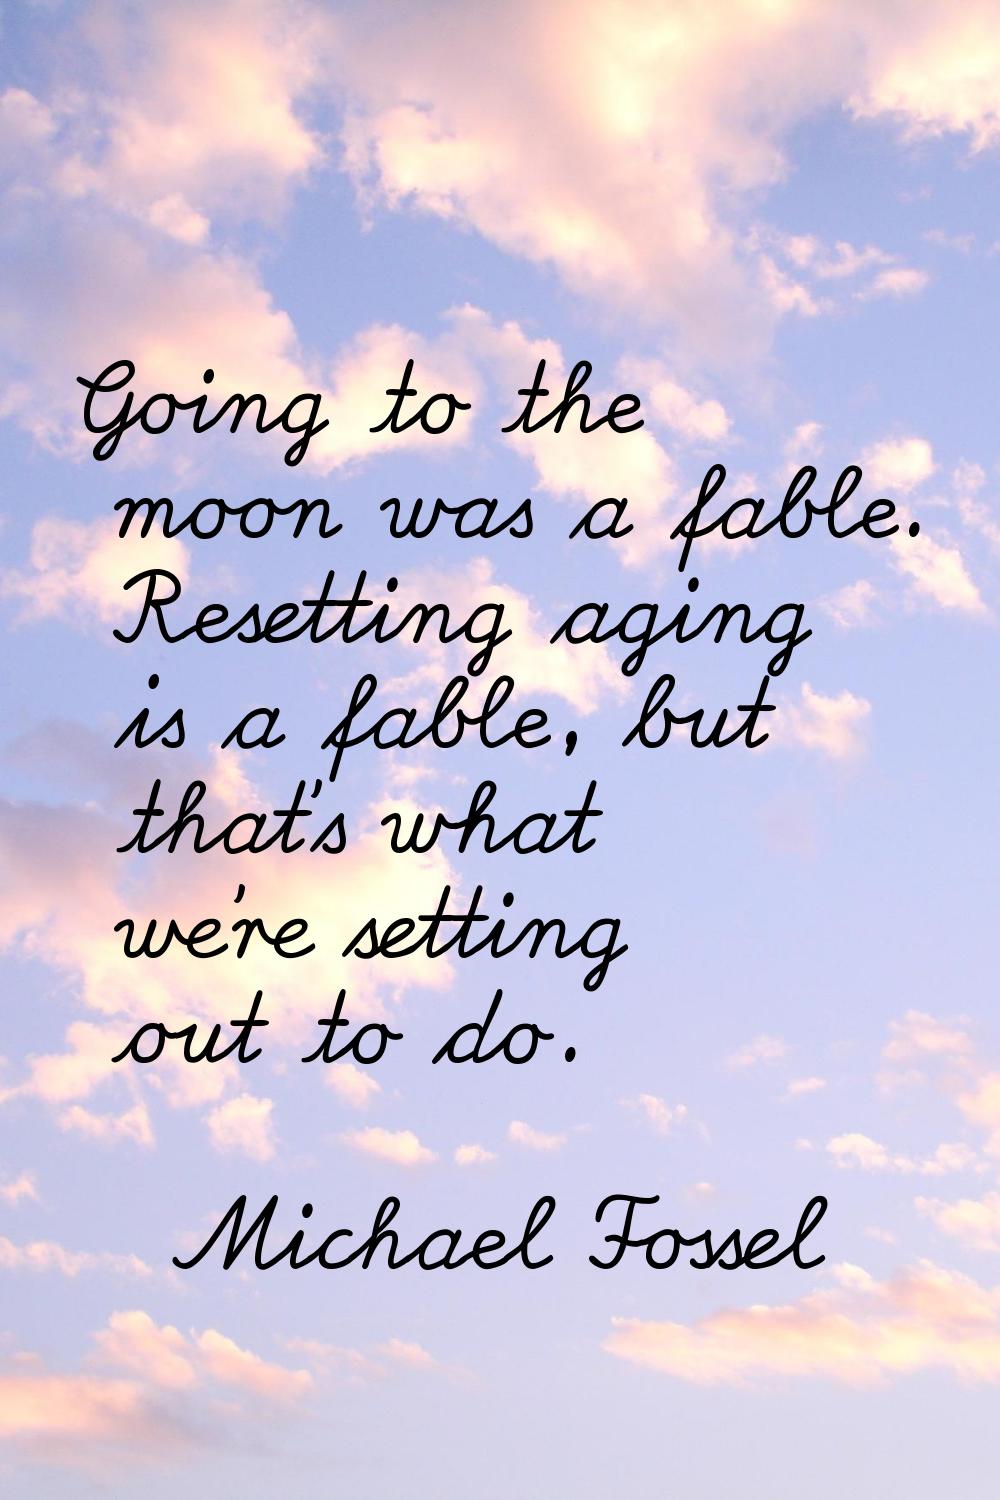 Going to the moon was a fable. Resetting aging is a fable, but that's what we're setting out to do.